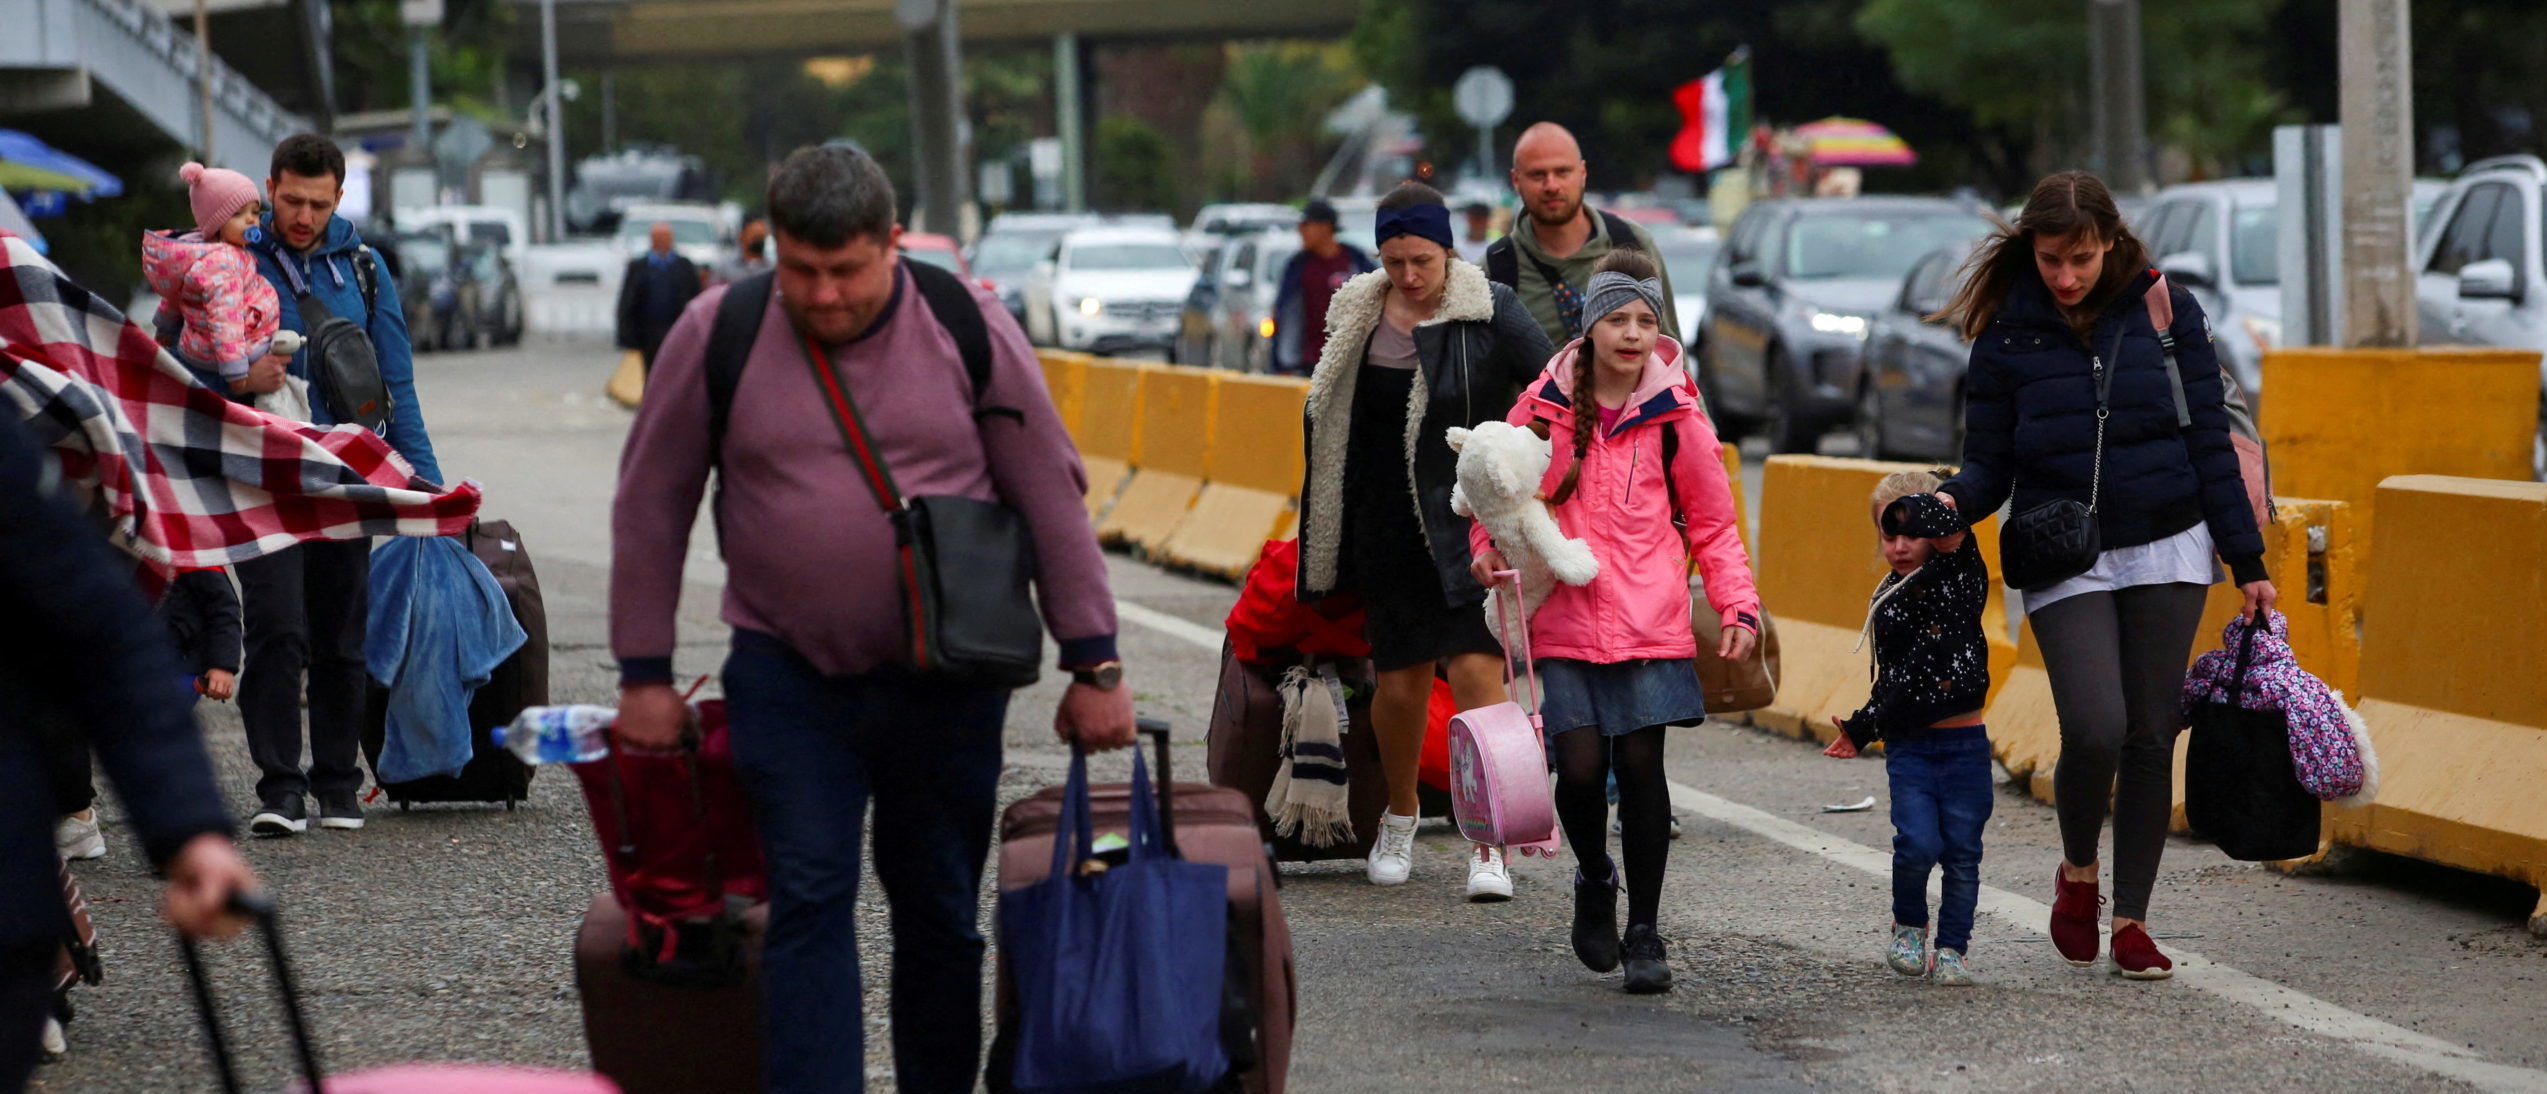 FILE PHOTO: Ukrainians who fled to Mexico amid Russia's invasion of their homeland, walk with their belongings to cross the San Ysidro Land Port of Entry of the U.S.-Mexico border, in Tijuana, Mexico April 2, 2022. REUTERS/Jorge Duenes/File Photo